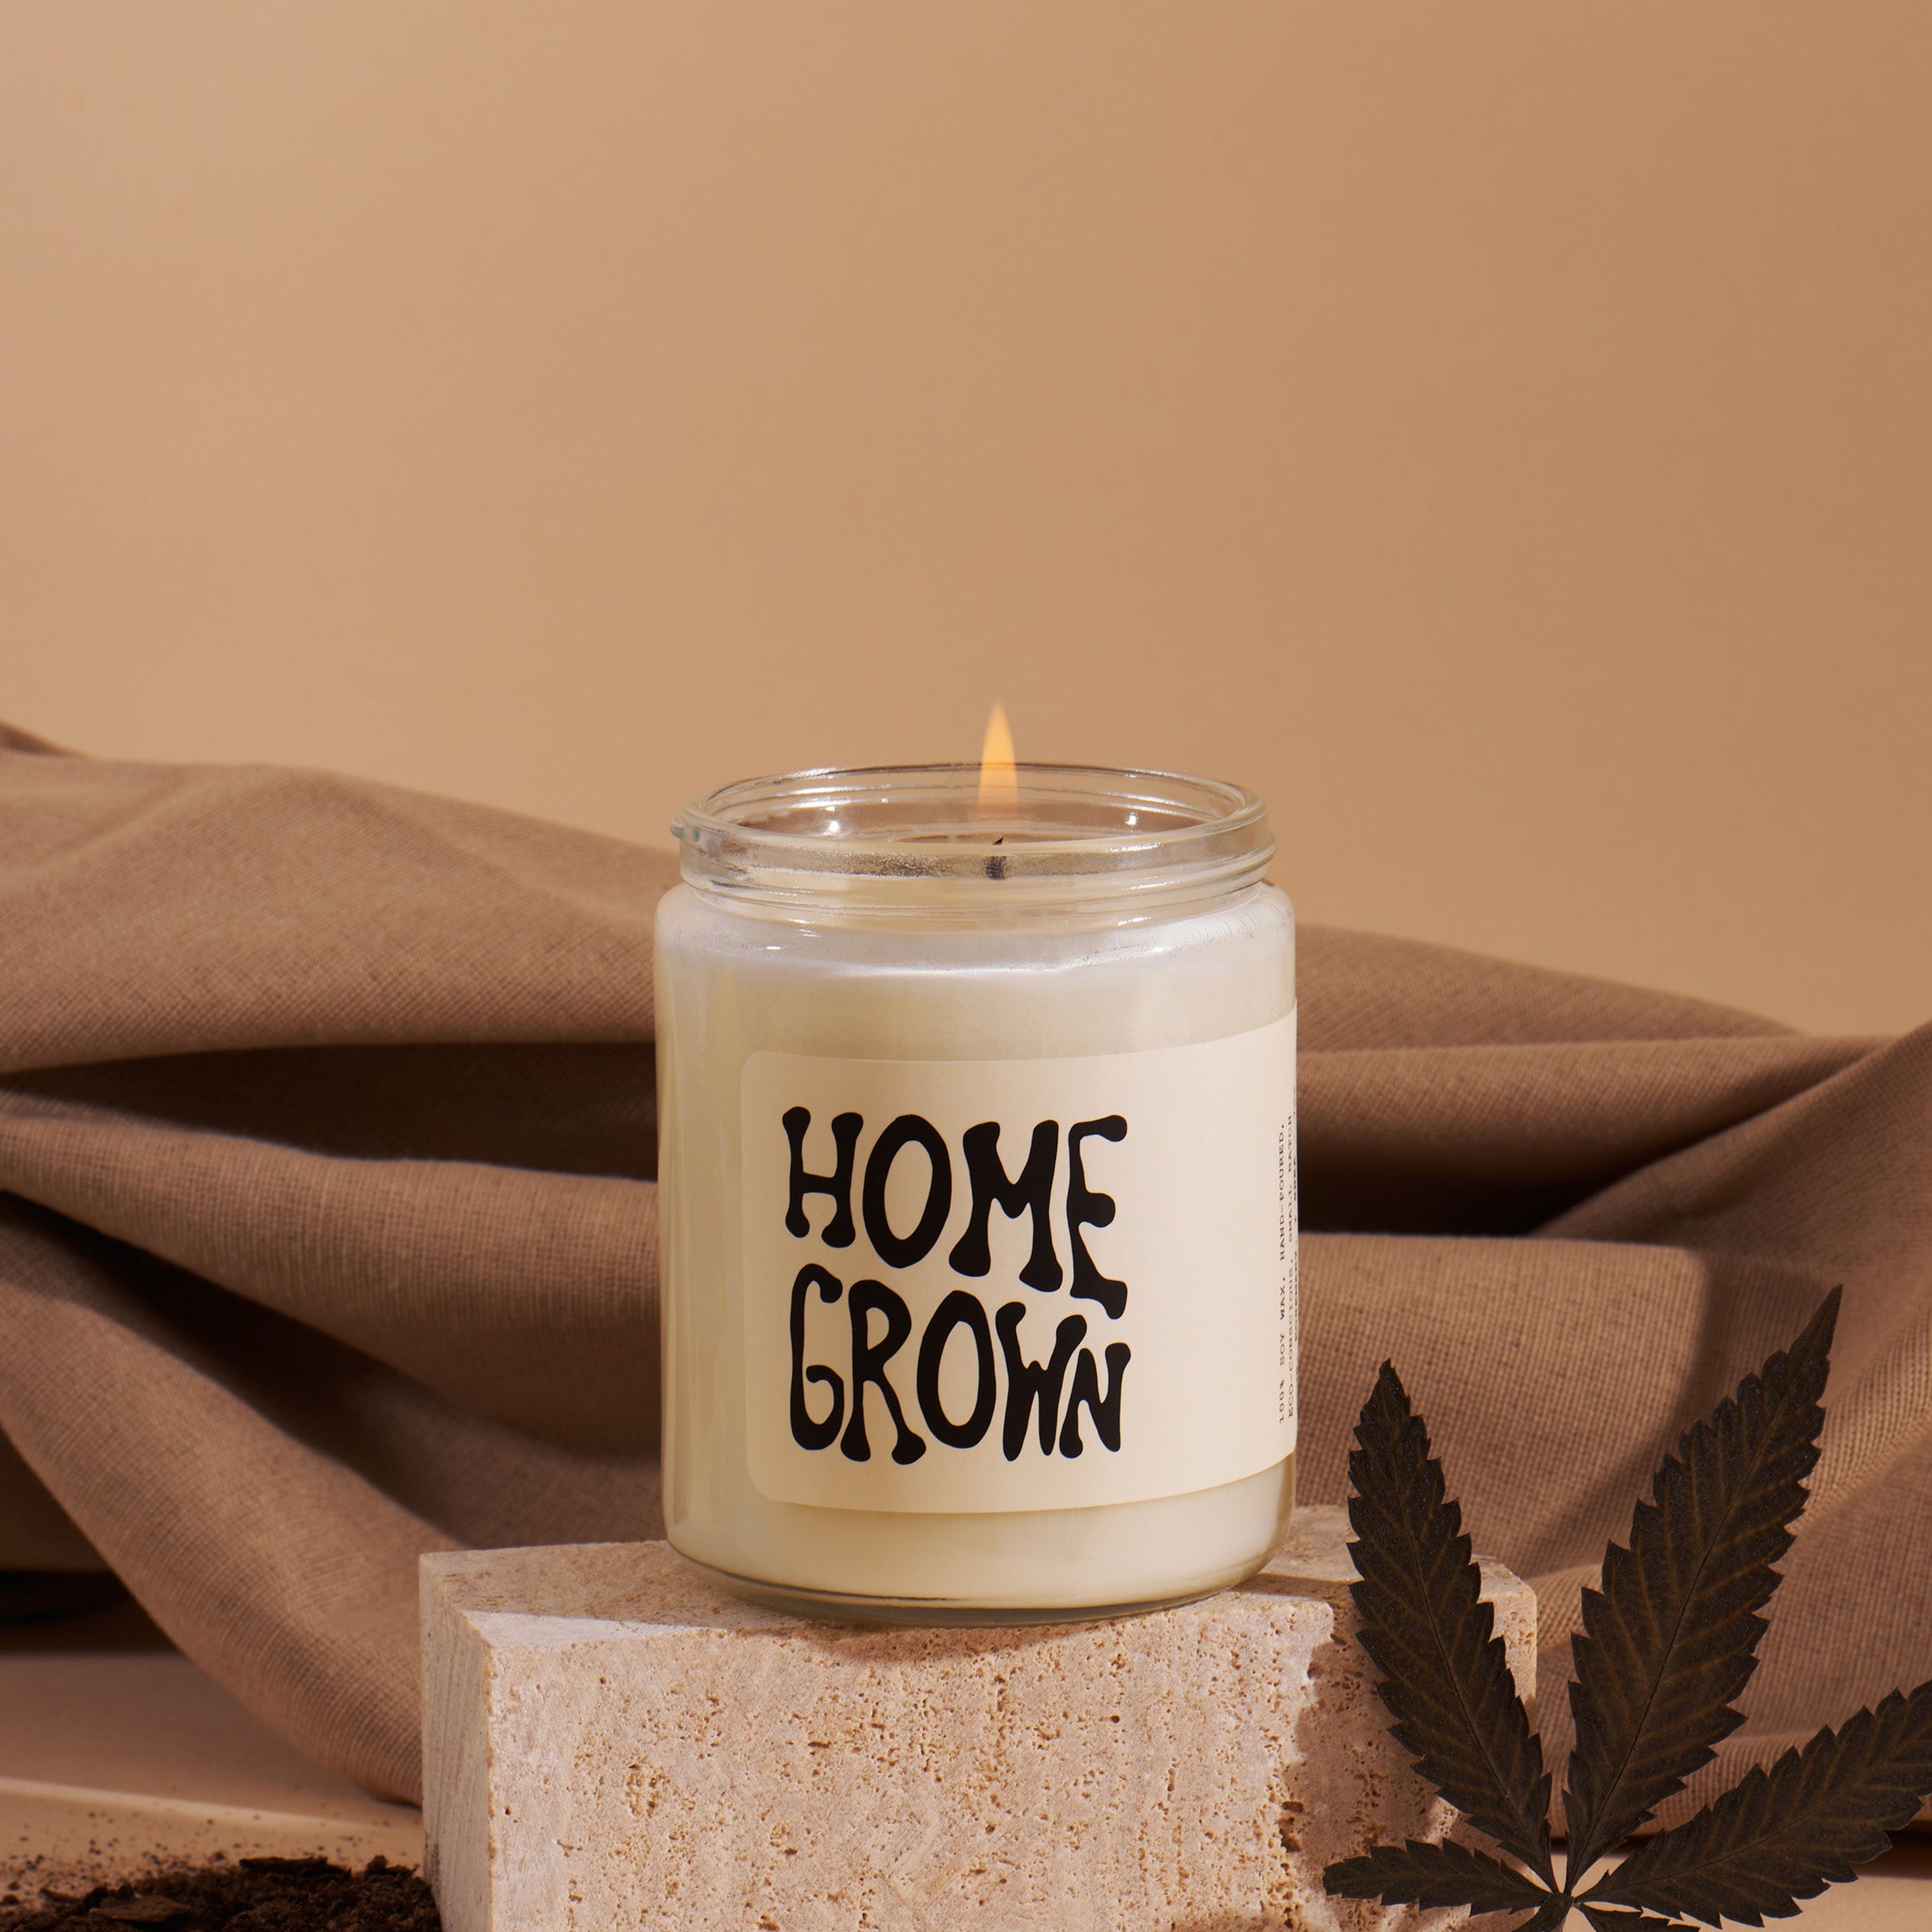 Home Grown - Candle